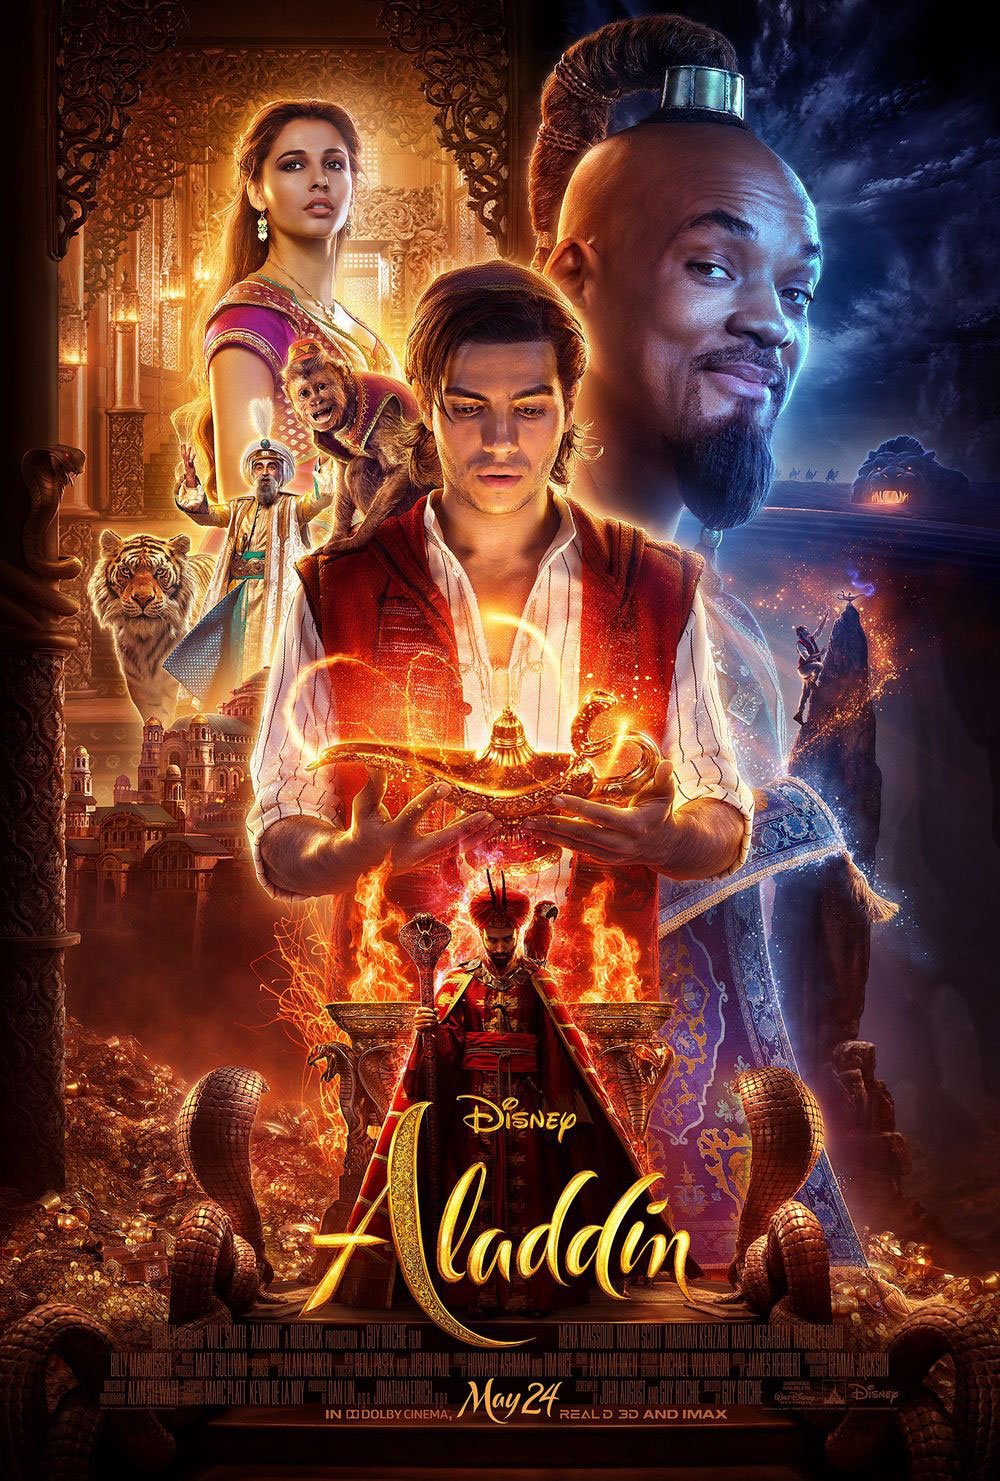 Aladdin Movie 2019 Wallpapers HD, Cast, Release Date, Official Trailer & Posters | Designbolts